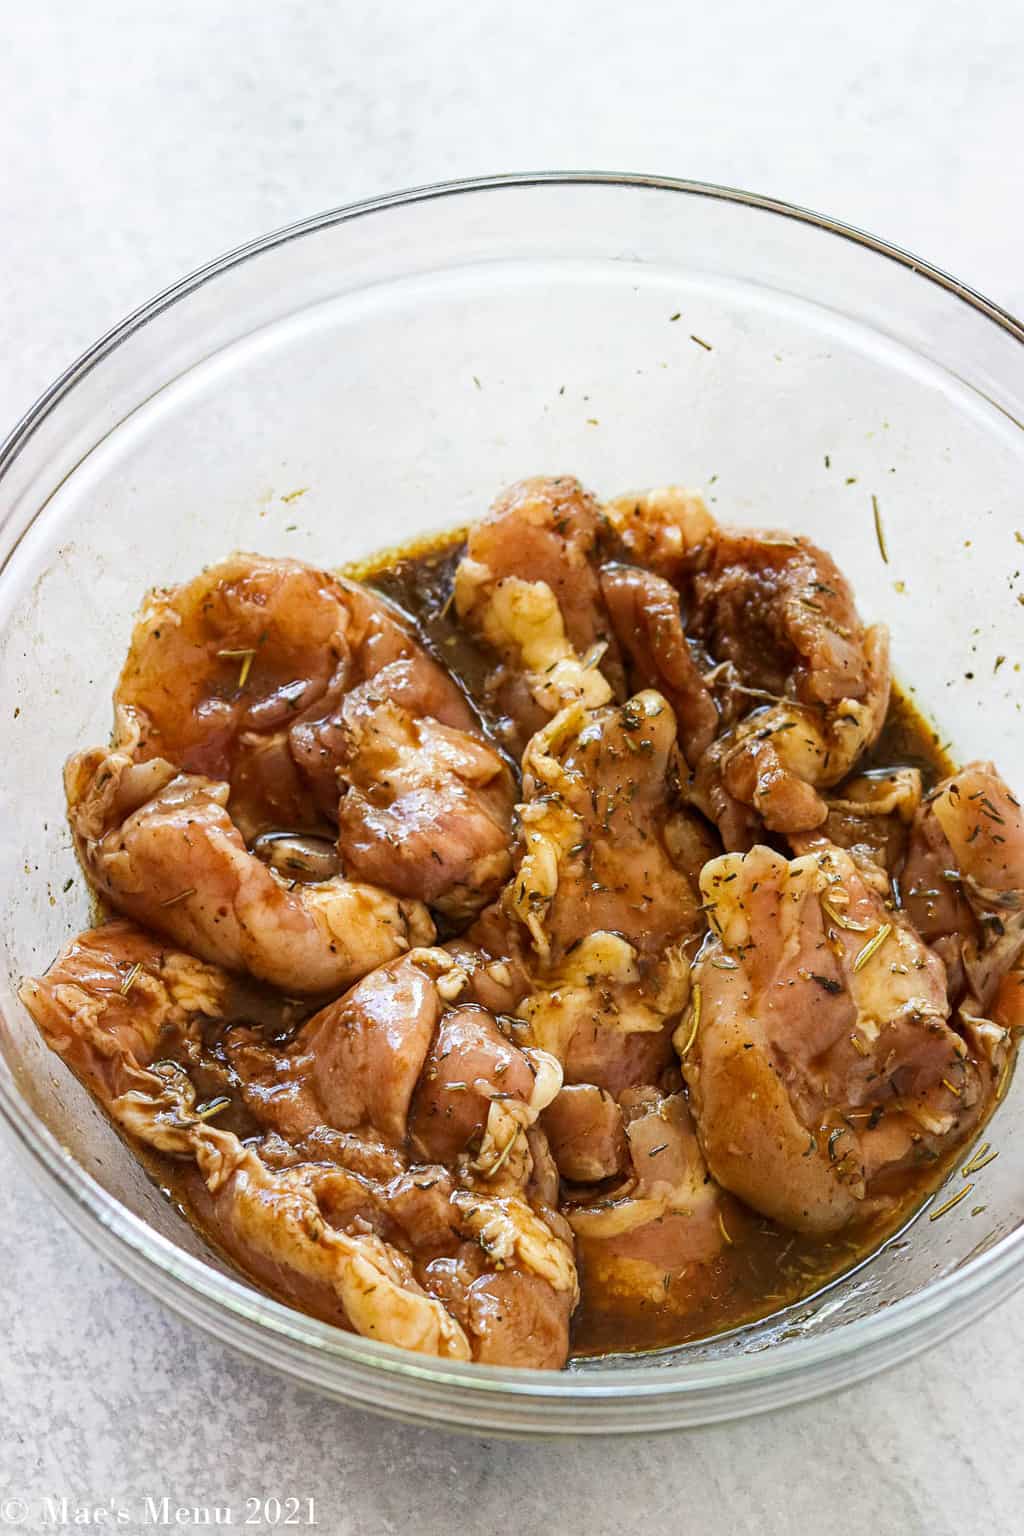 Chicken tossed in the balsamic marinade in a mixing bowl